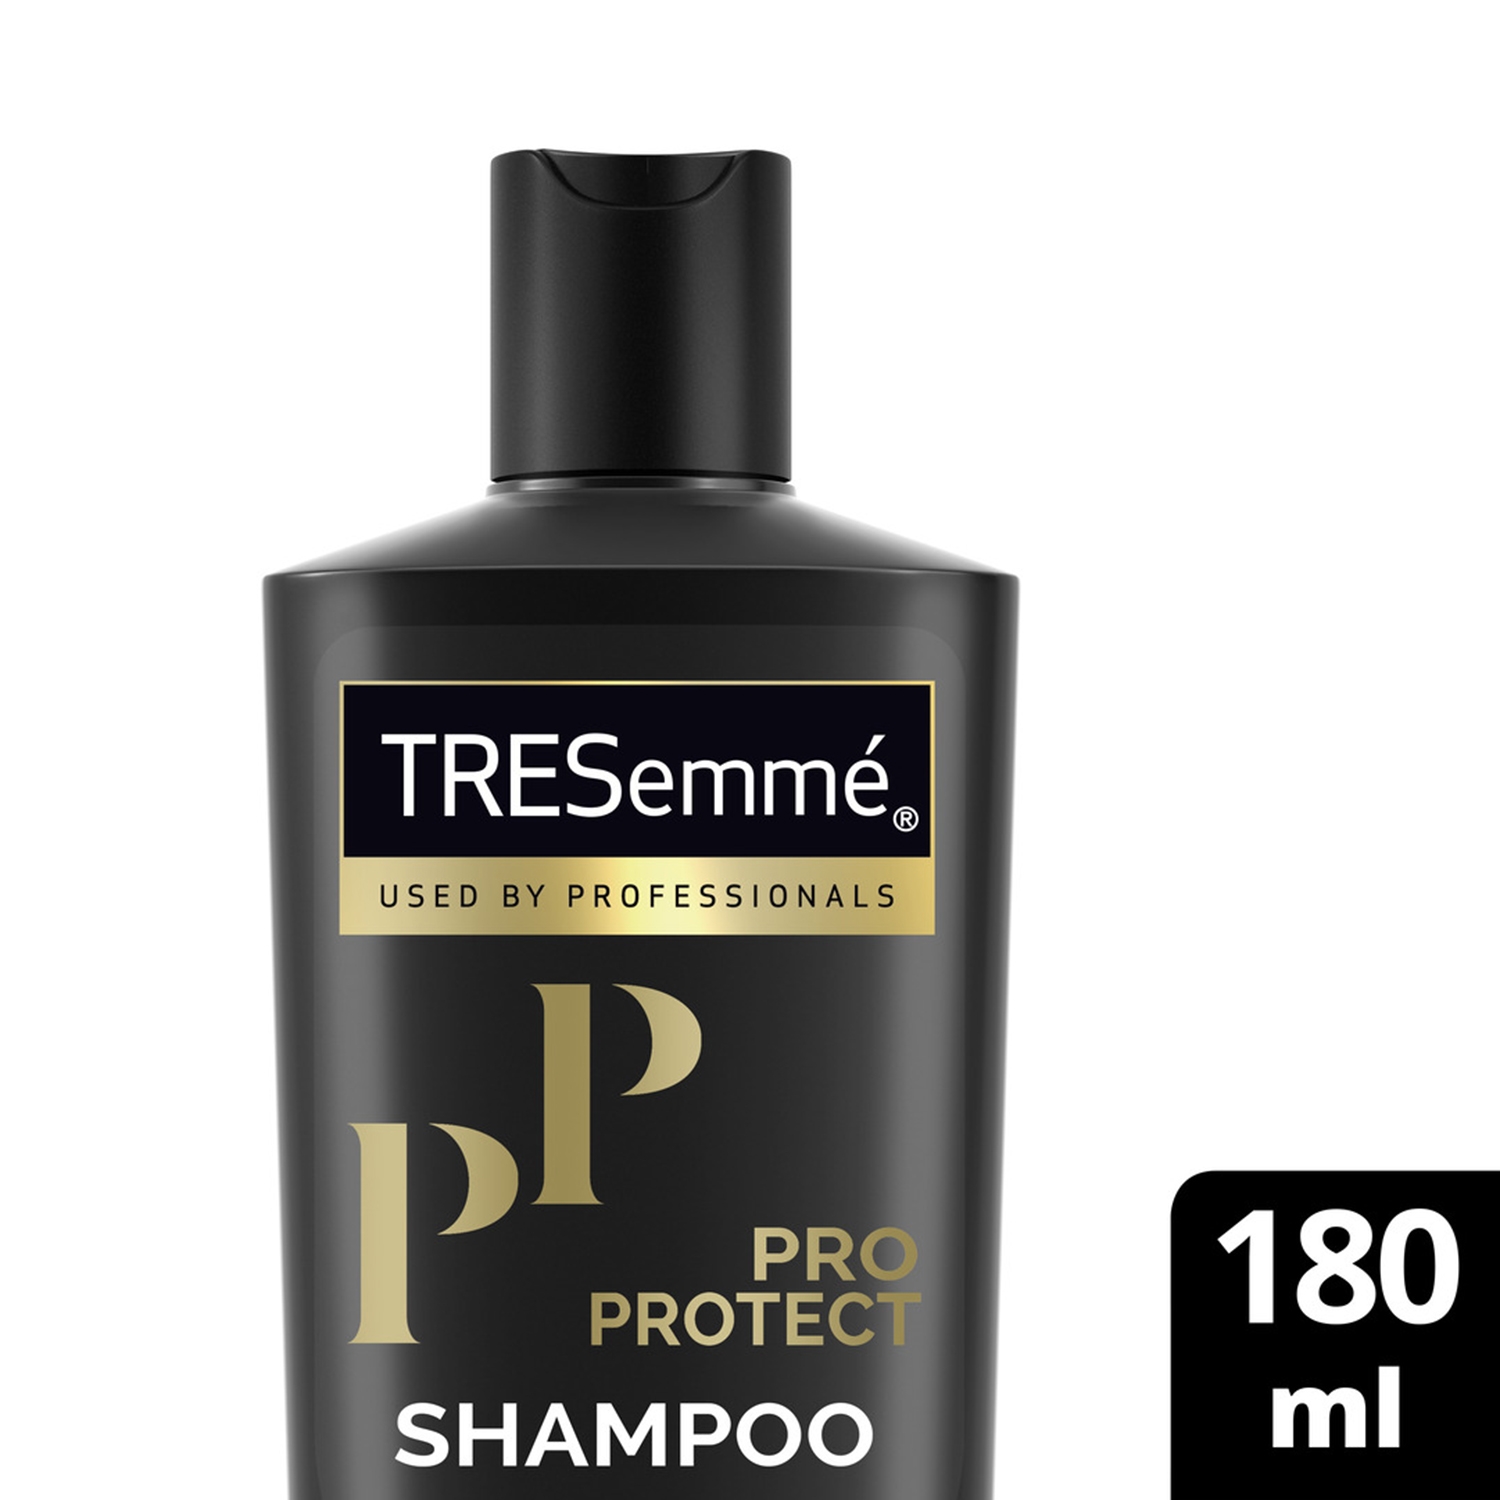 Tresemme Pro Protect Sulphate Free Shampoo with Moroccan Argan Oil (180ml)